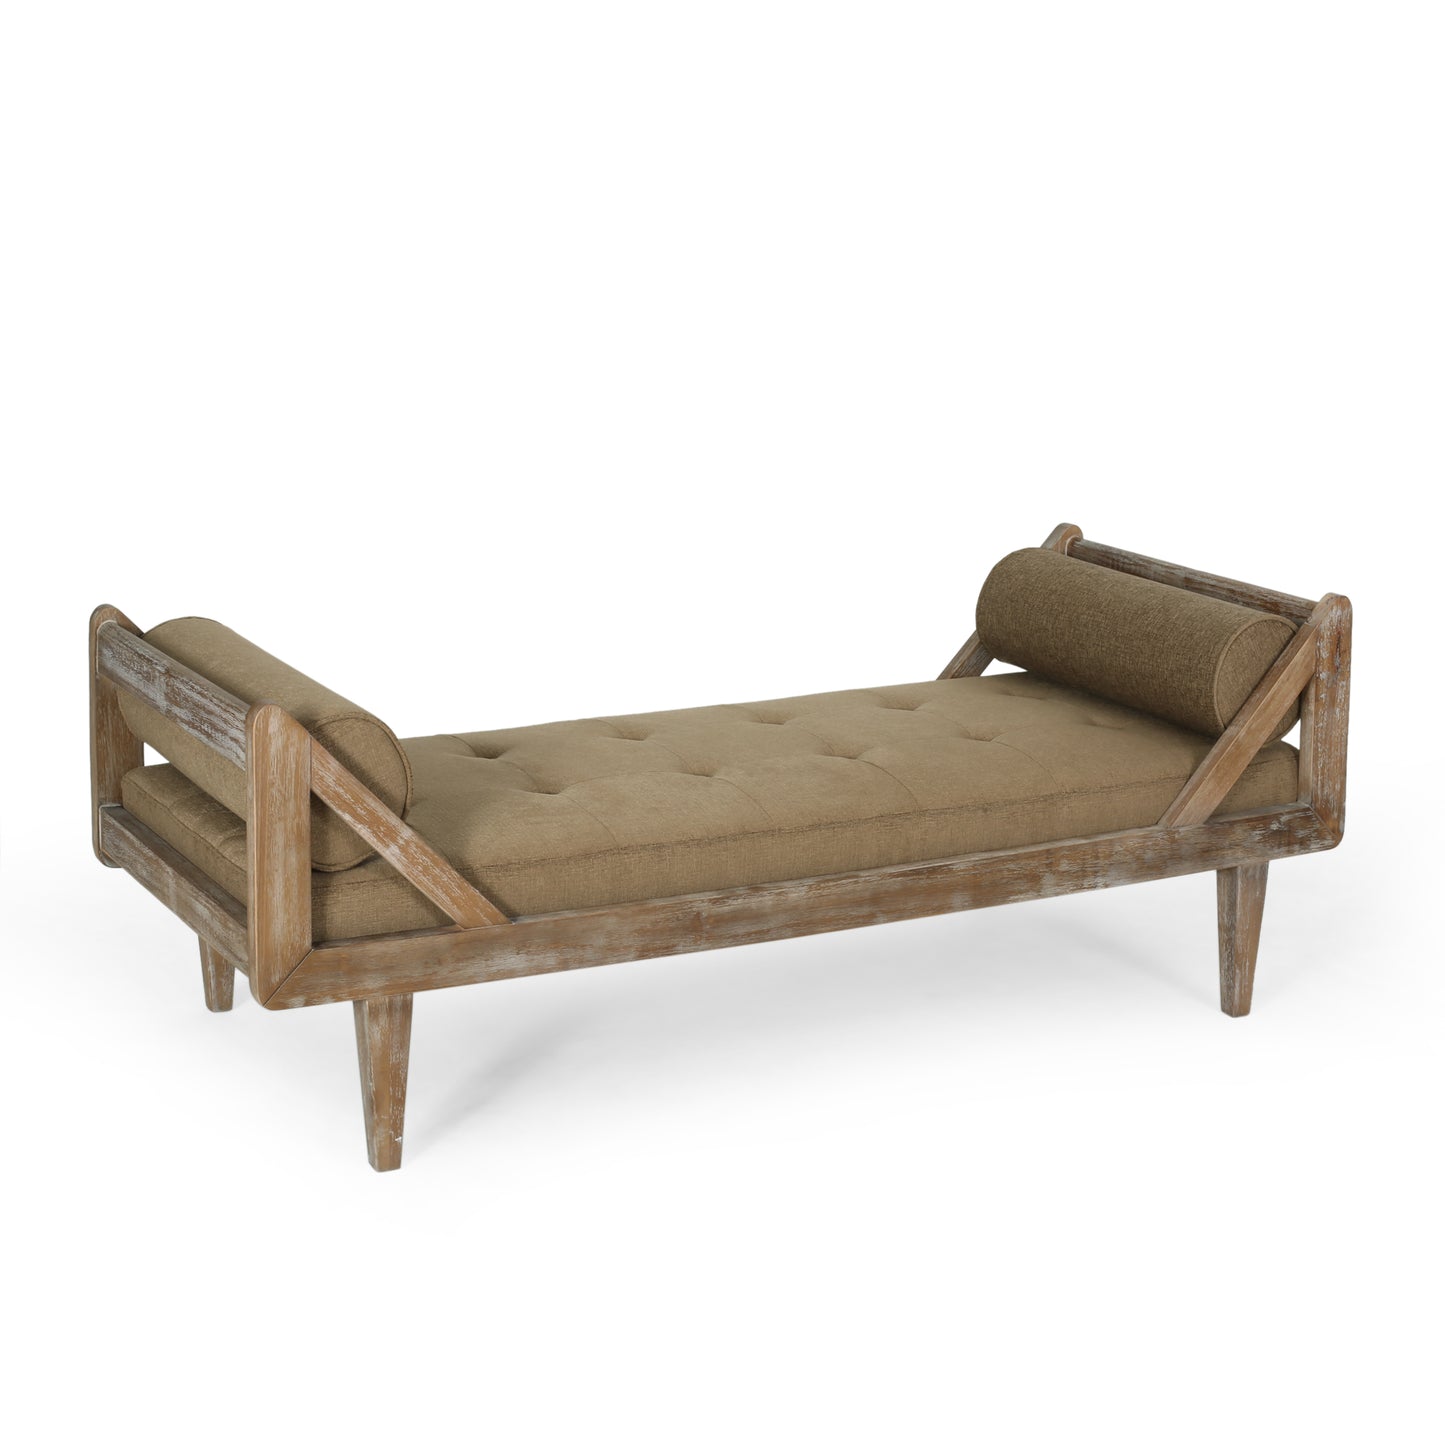 Huller Rustic Tufted Double End Chaise Lounge with Bolster Pillows